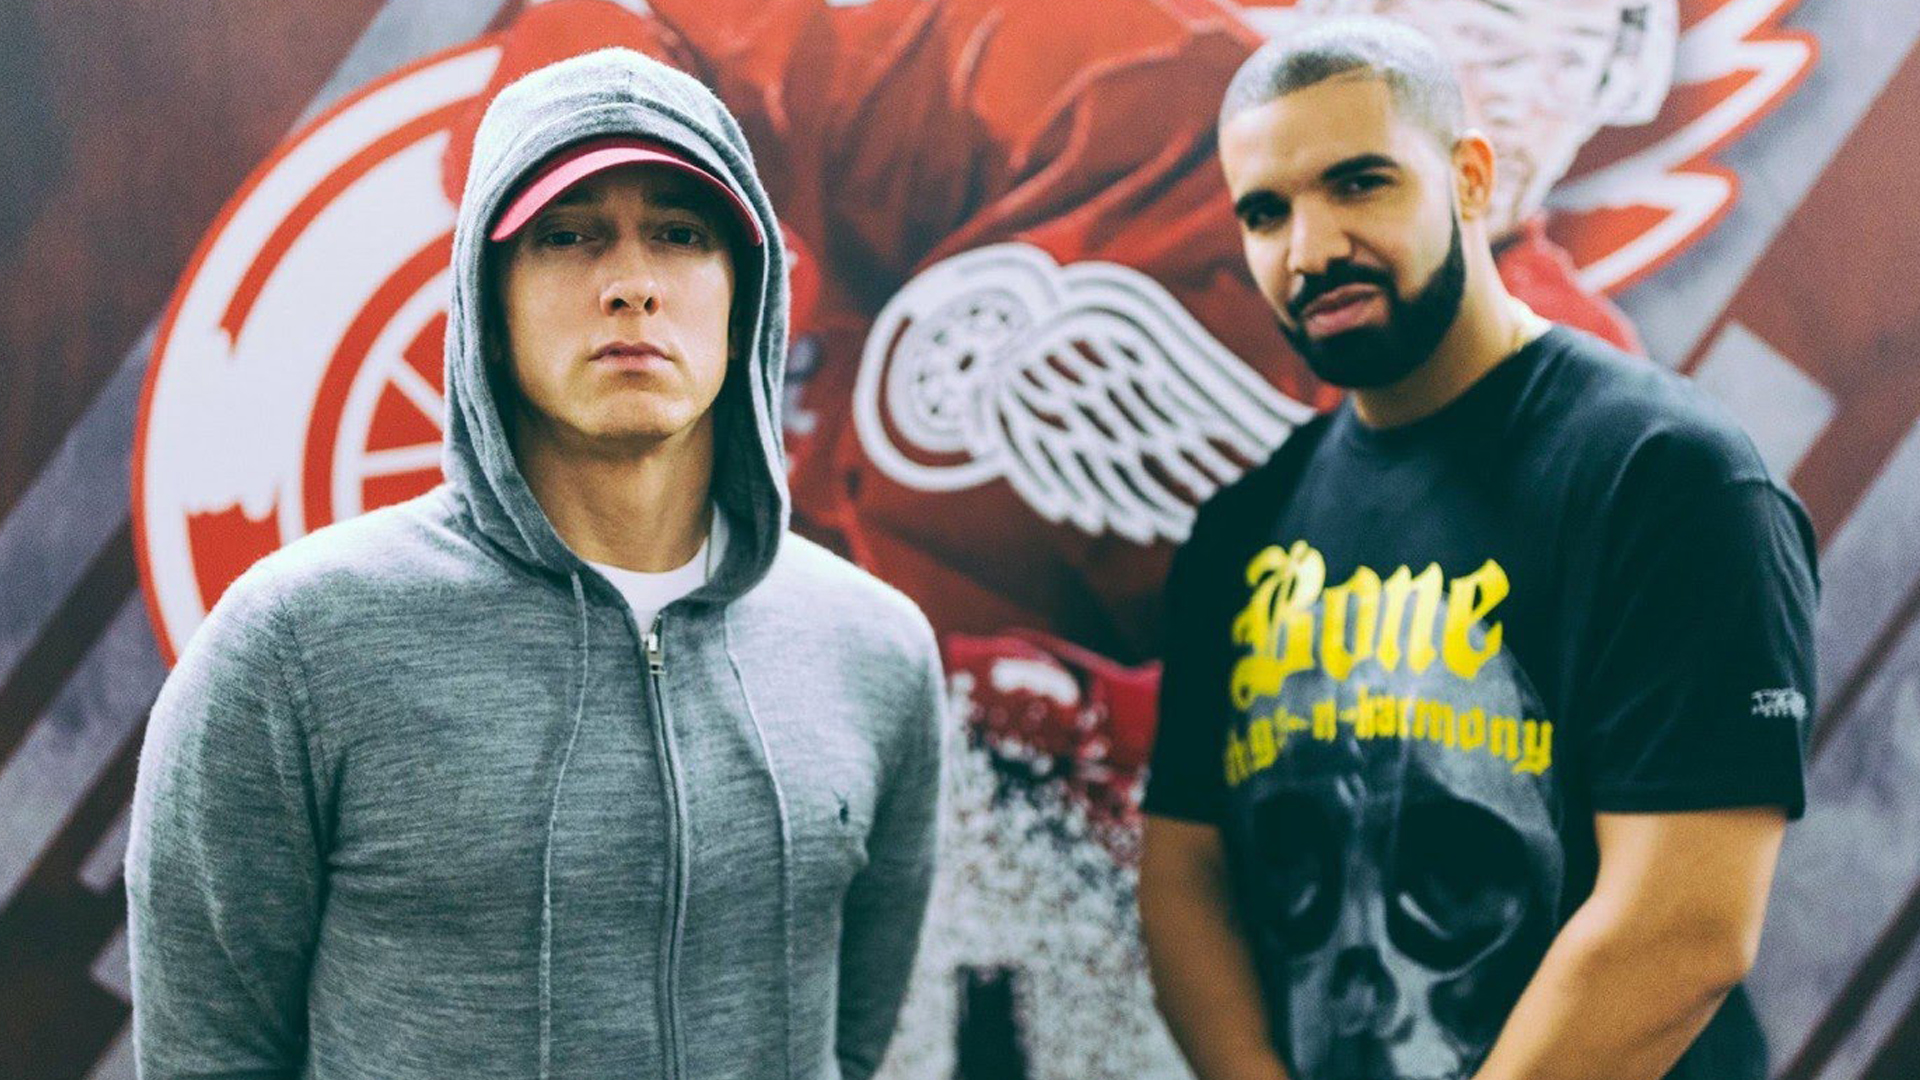 Eminem confirmed he dissed Drake on Kamikaze immigrating his movements in Lucky You video